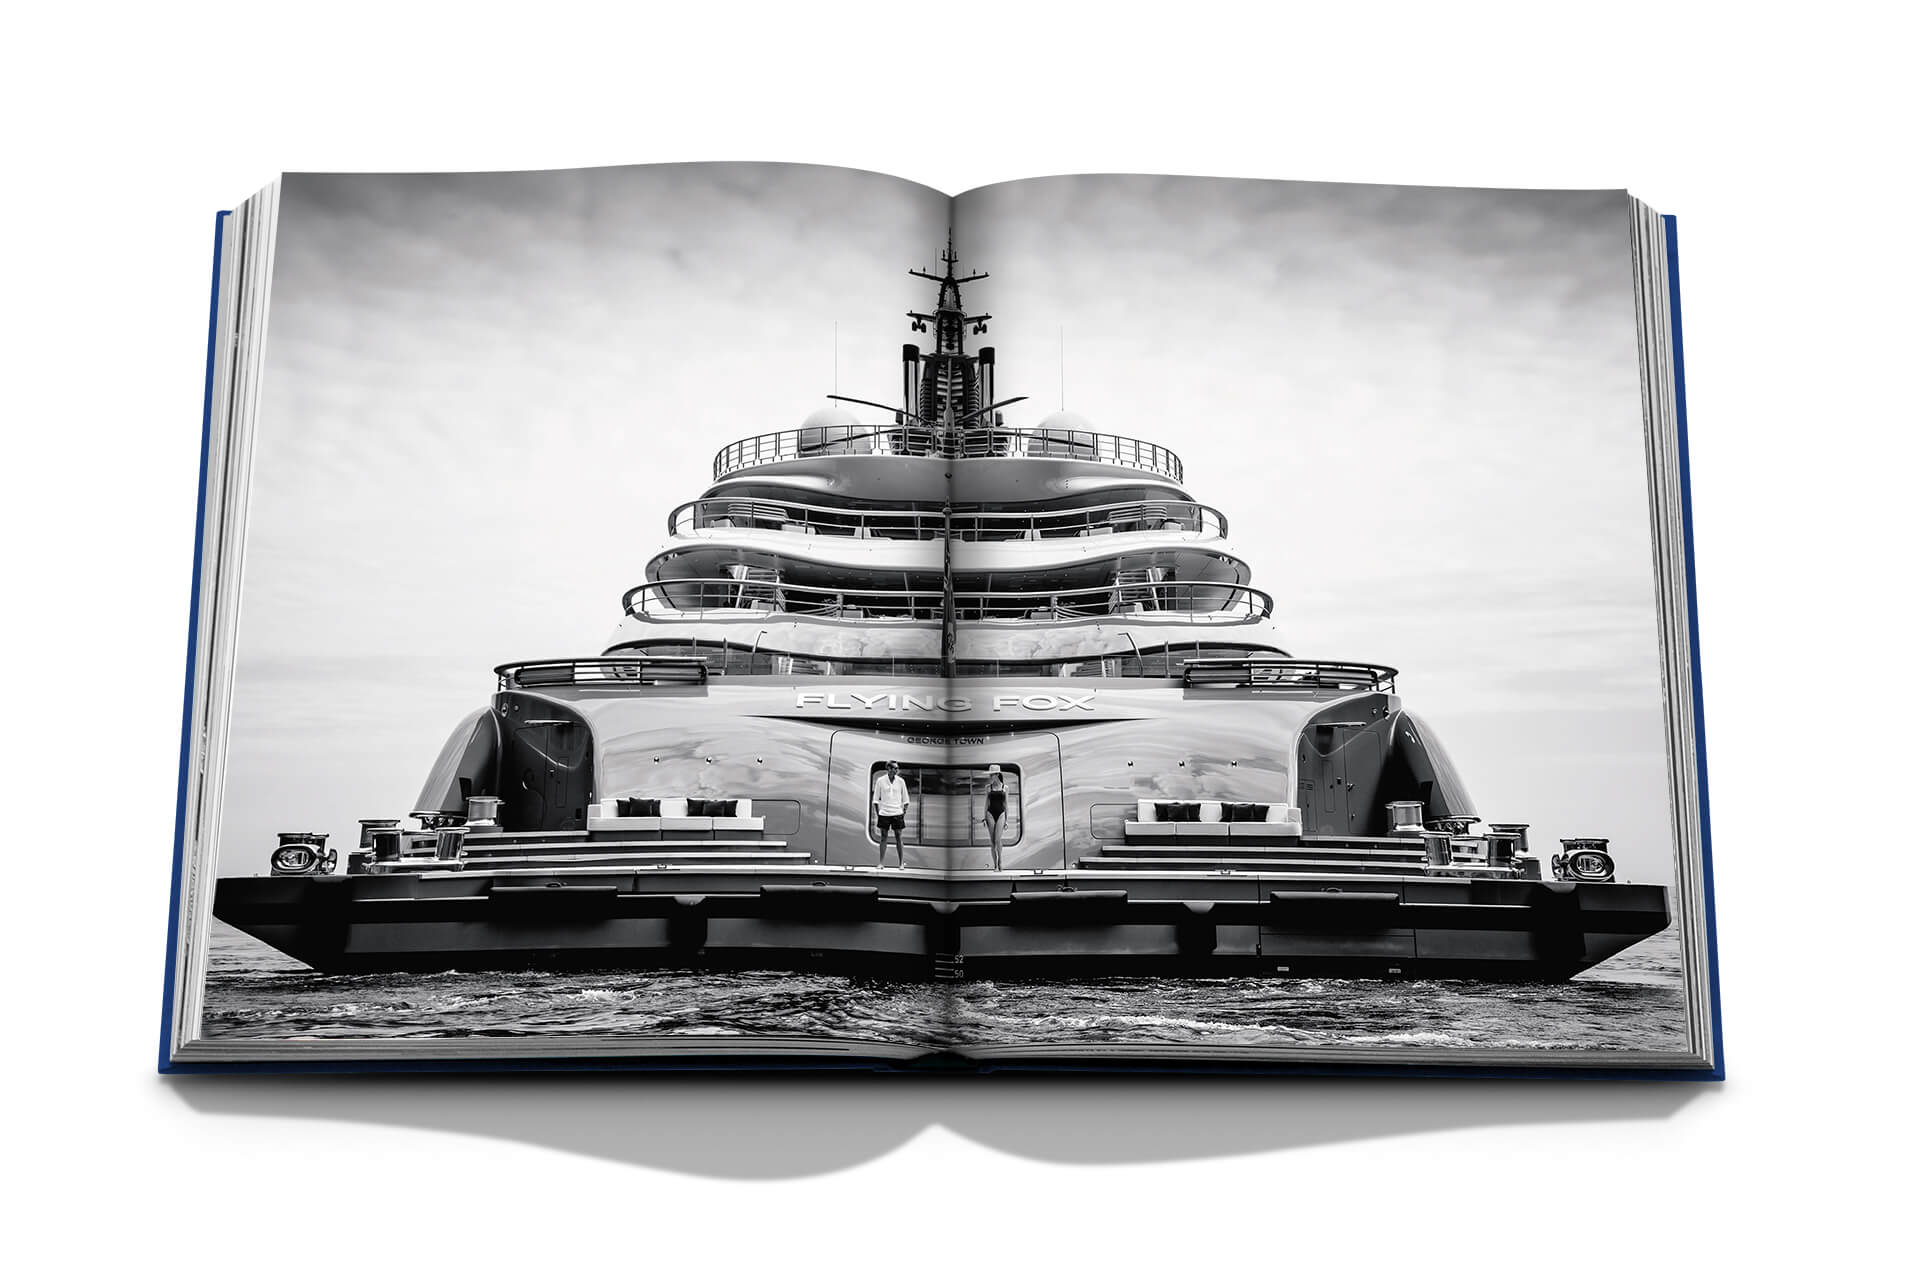 Assouline - Yachts: The Impossible Collection - Coffee Table Book 